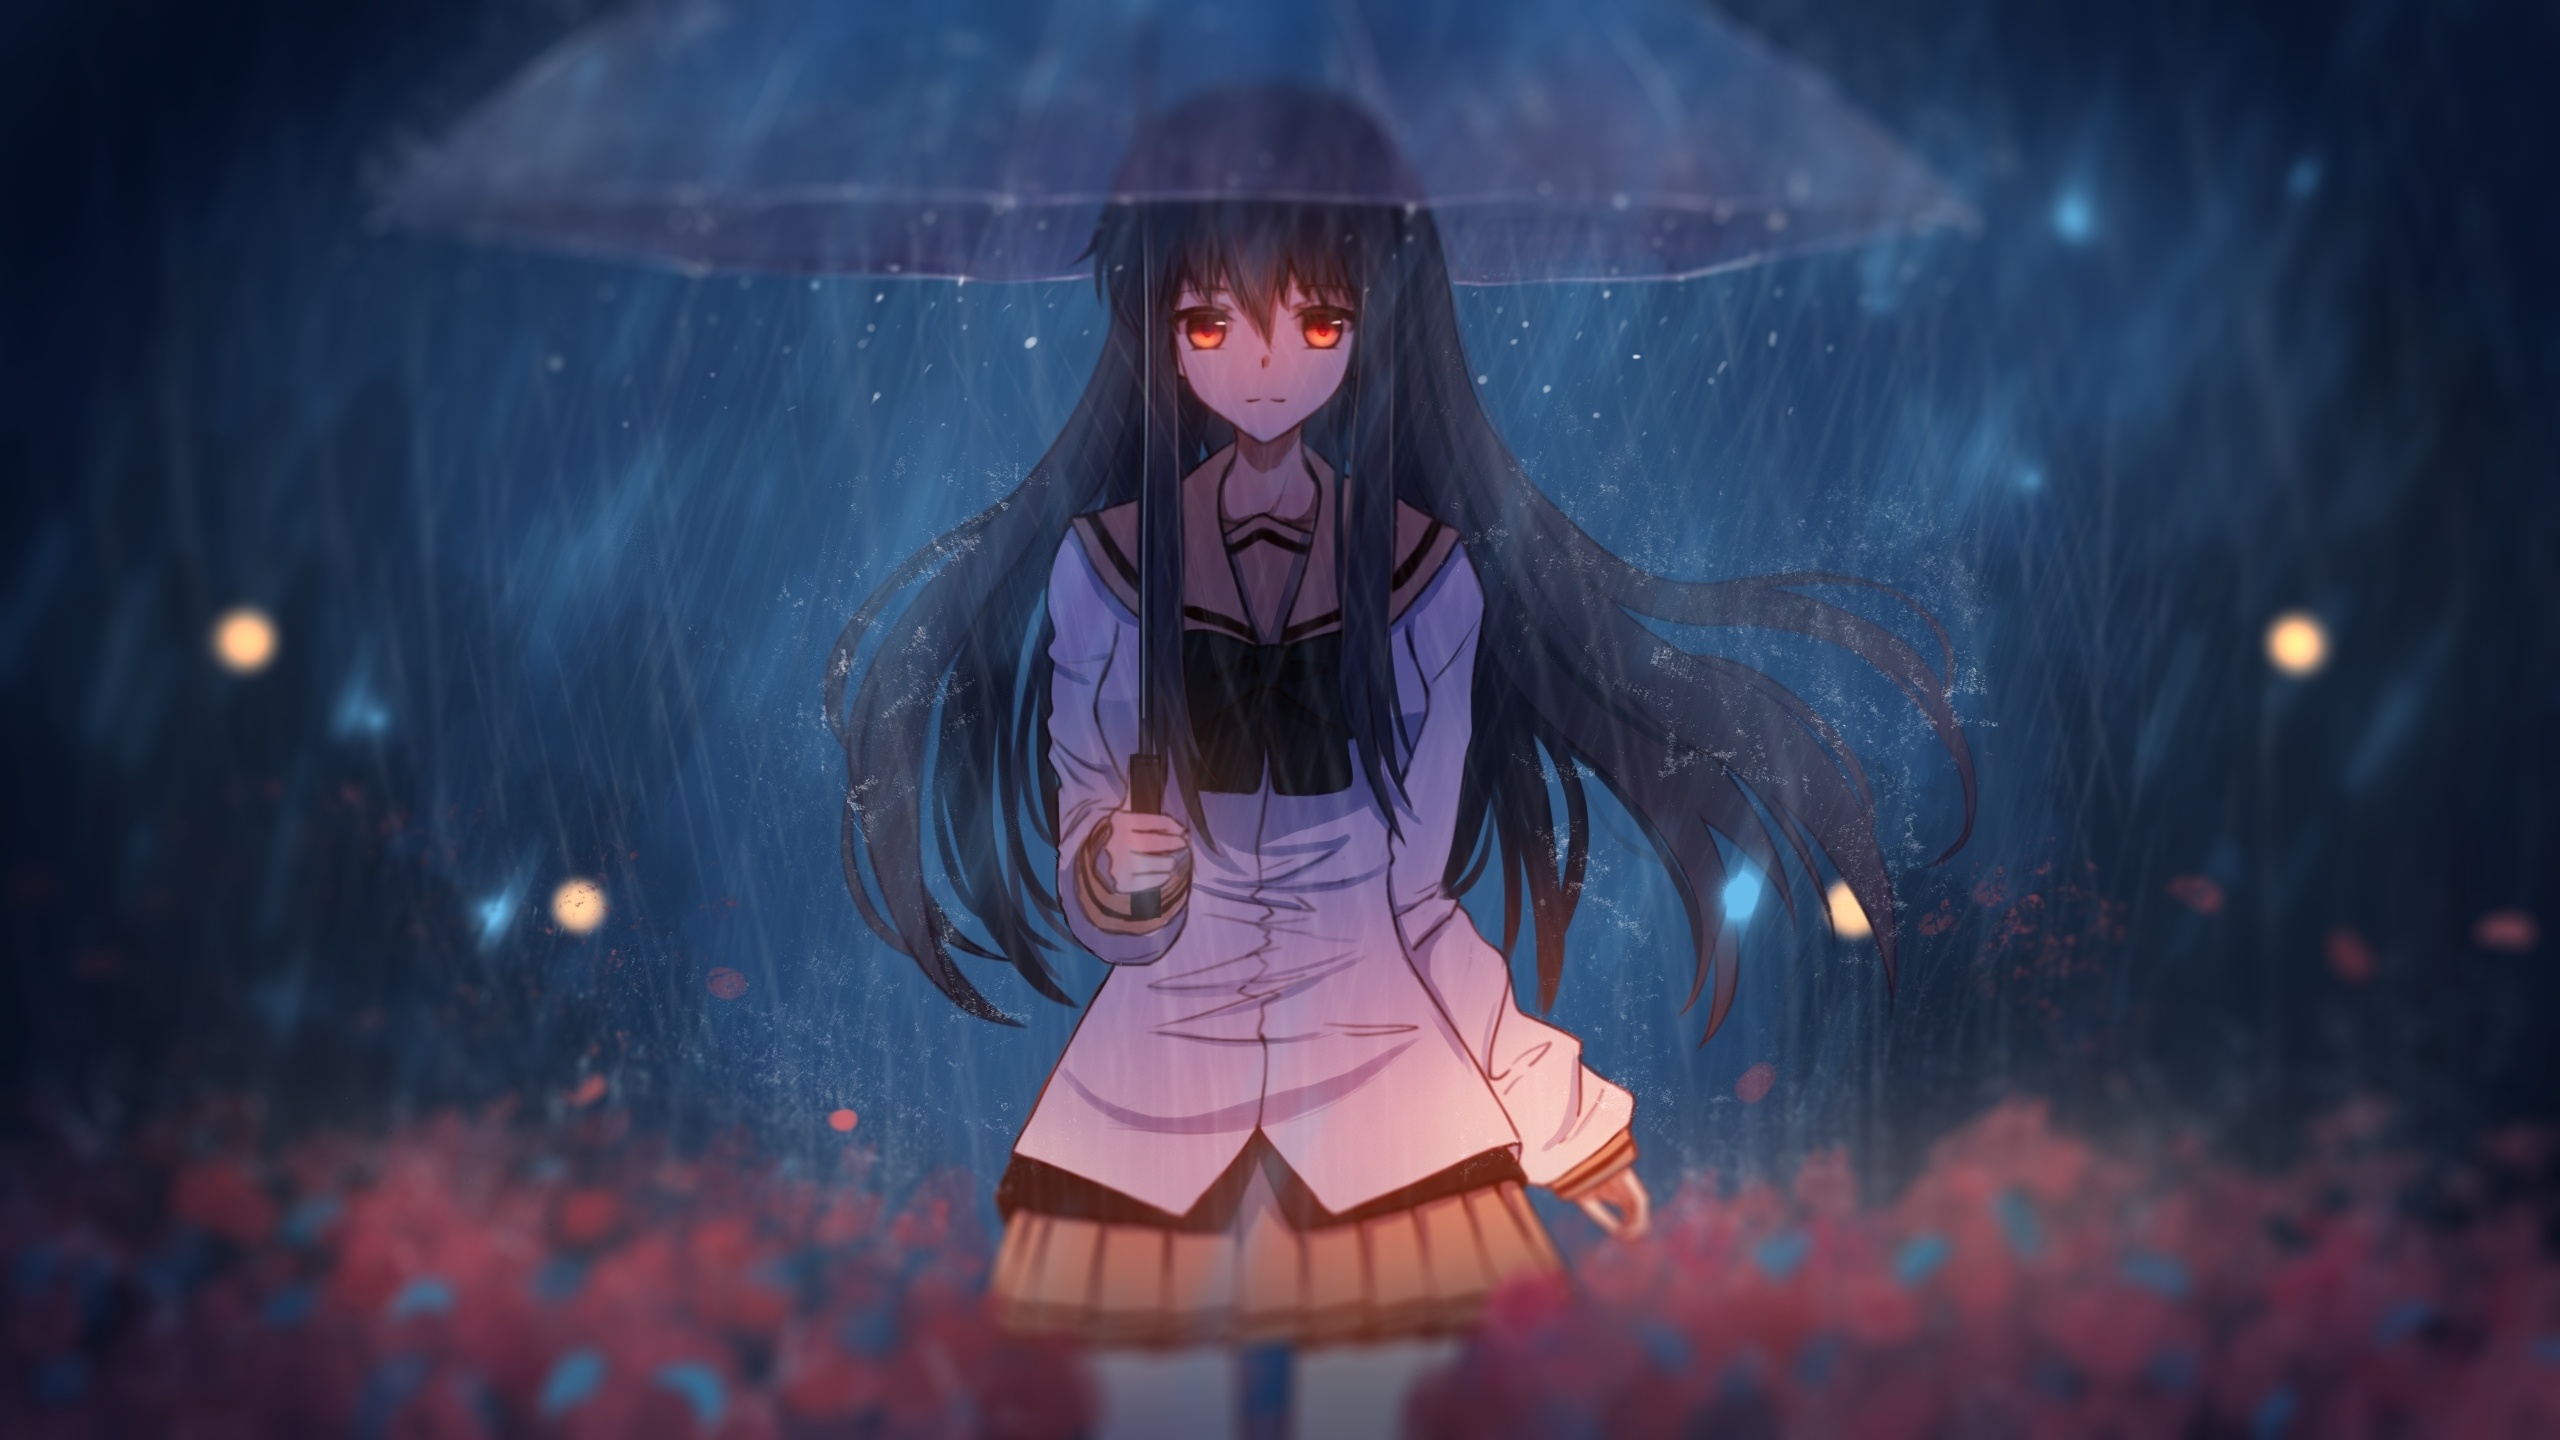 Download wallpaper 2560x1440 anime girl in rain, with umbrella, art, dual  wide 16:9 2560x1440 hd background, 8992